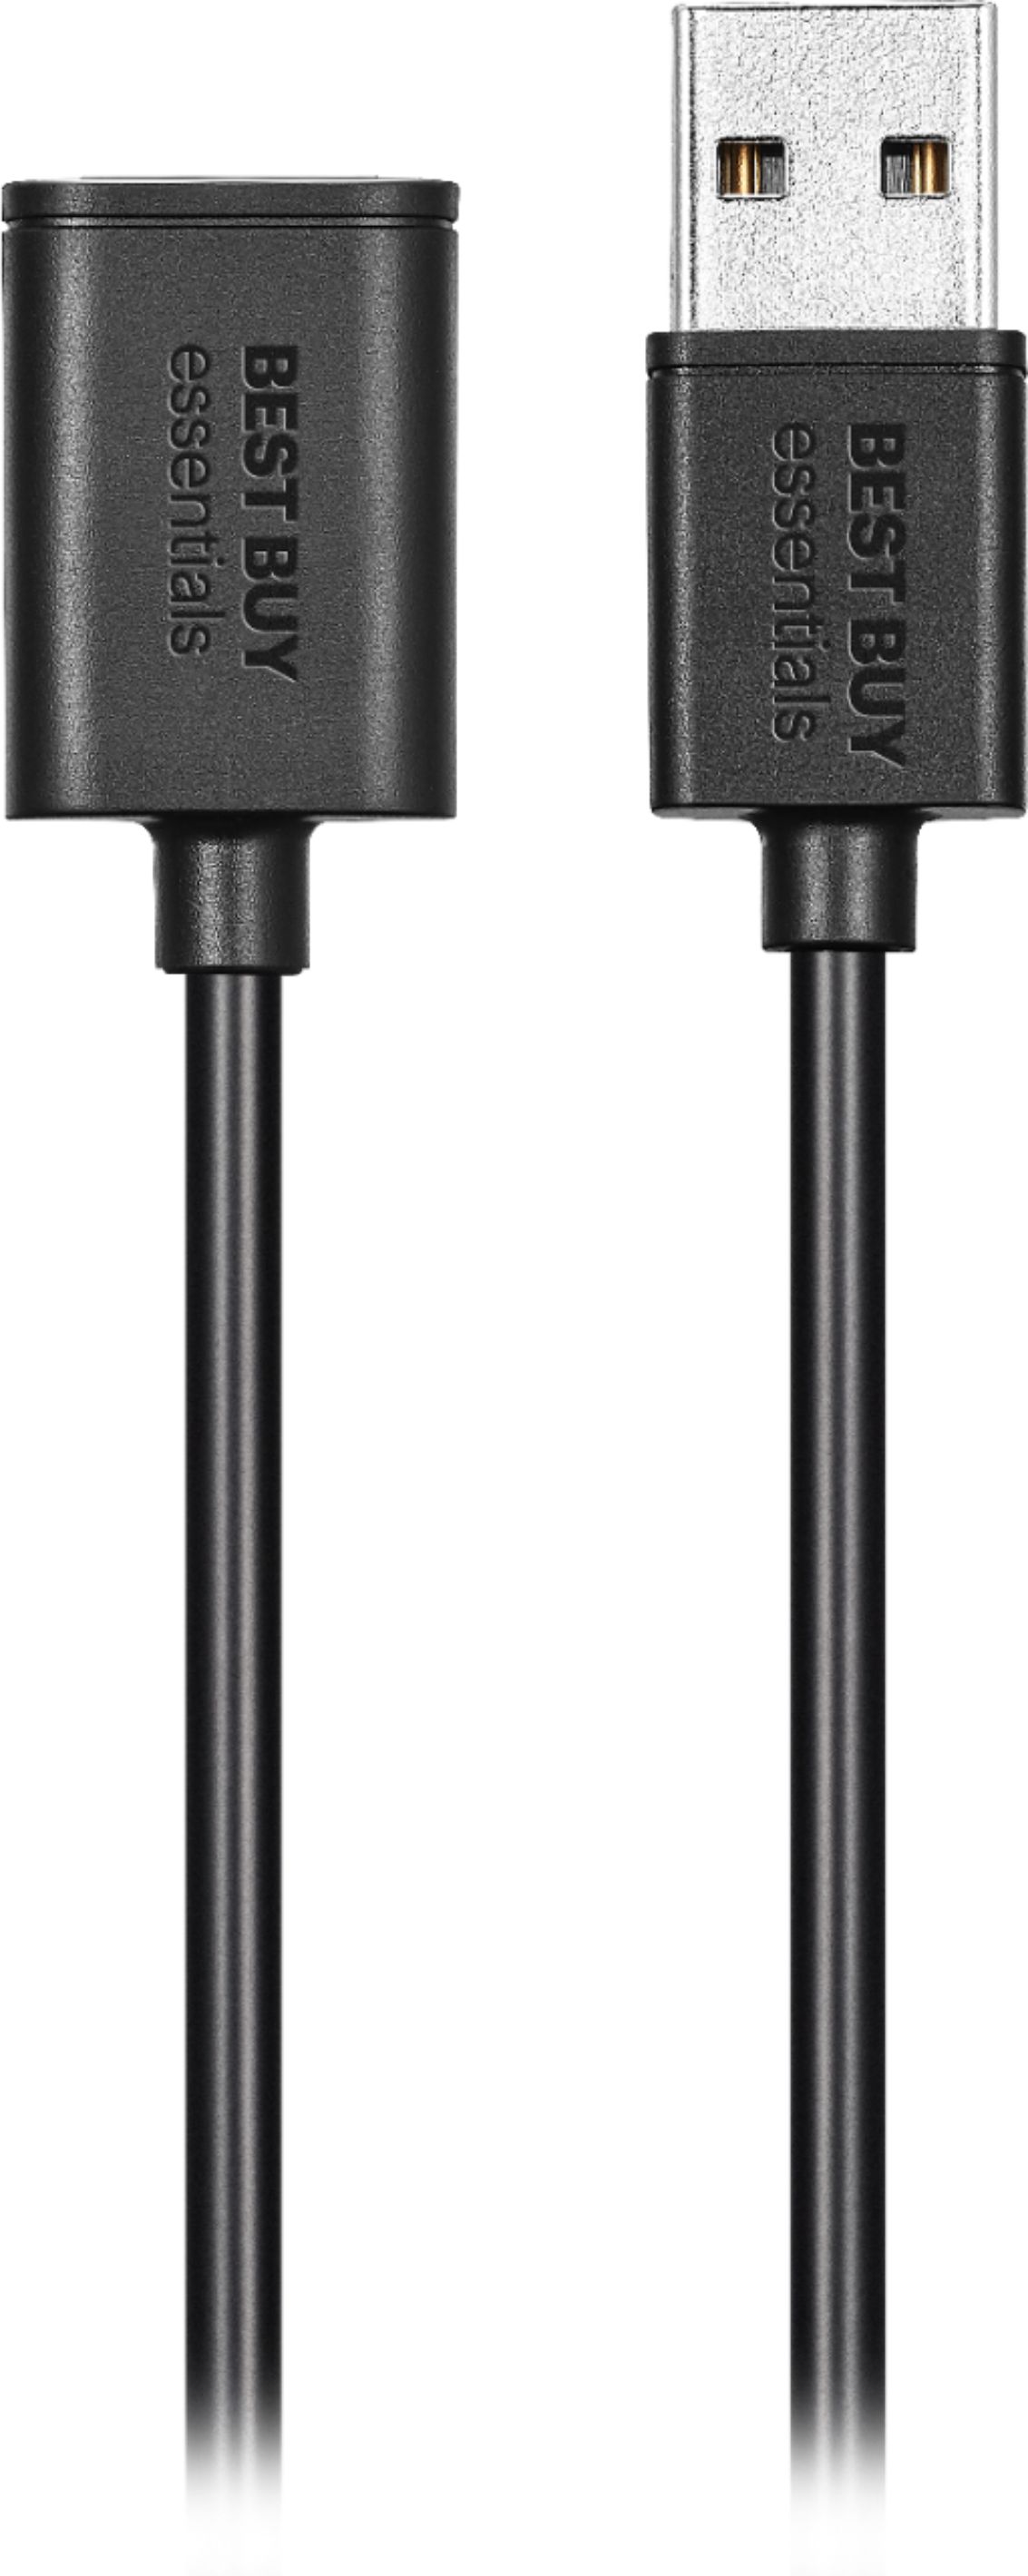 Angle View: Best Buy essentials™ - 6' USB 2.0 A-Male to A-Female Extension Cable - Black